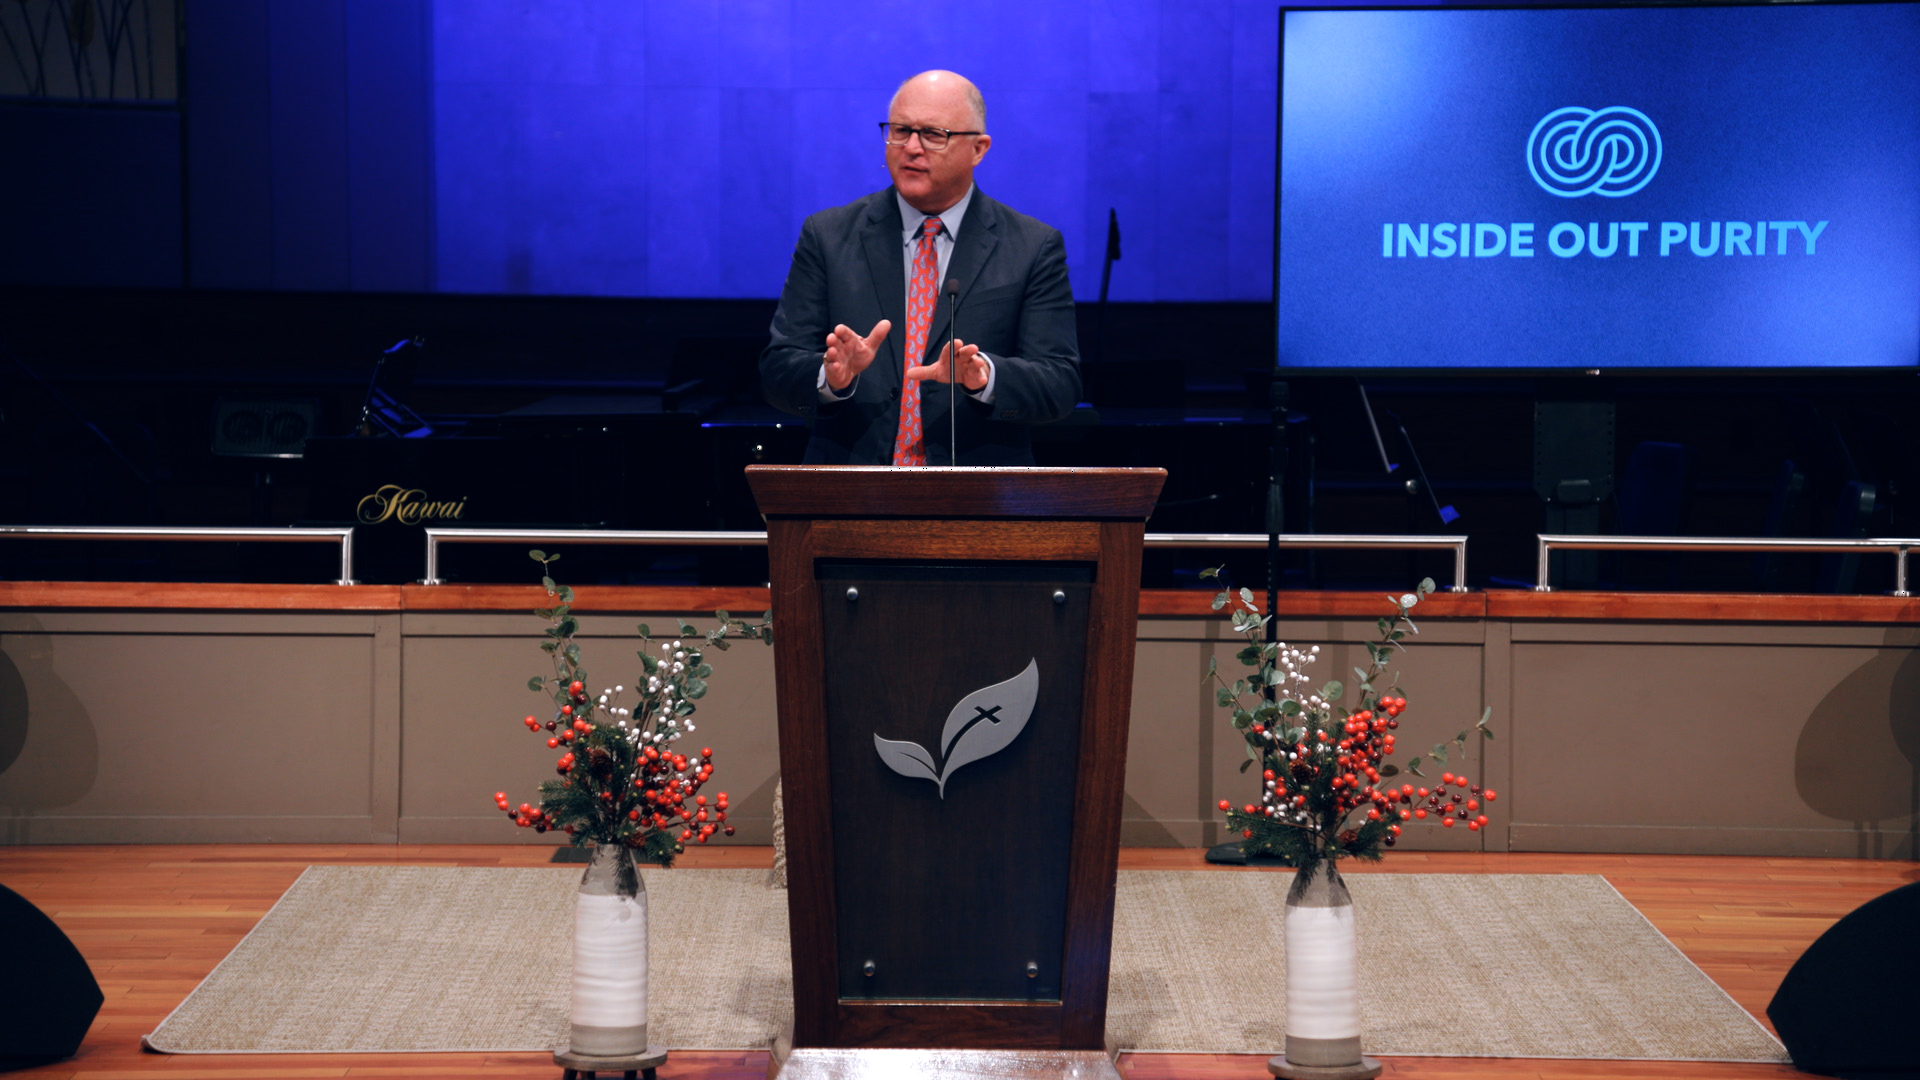 Pastor Paul Chappell: Inside Out Purity